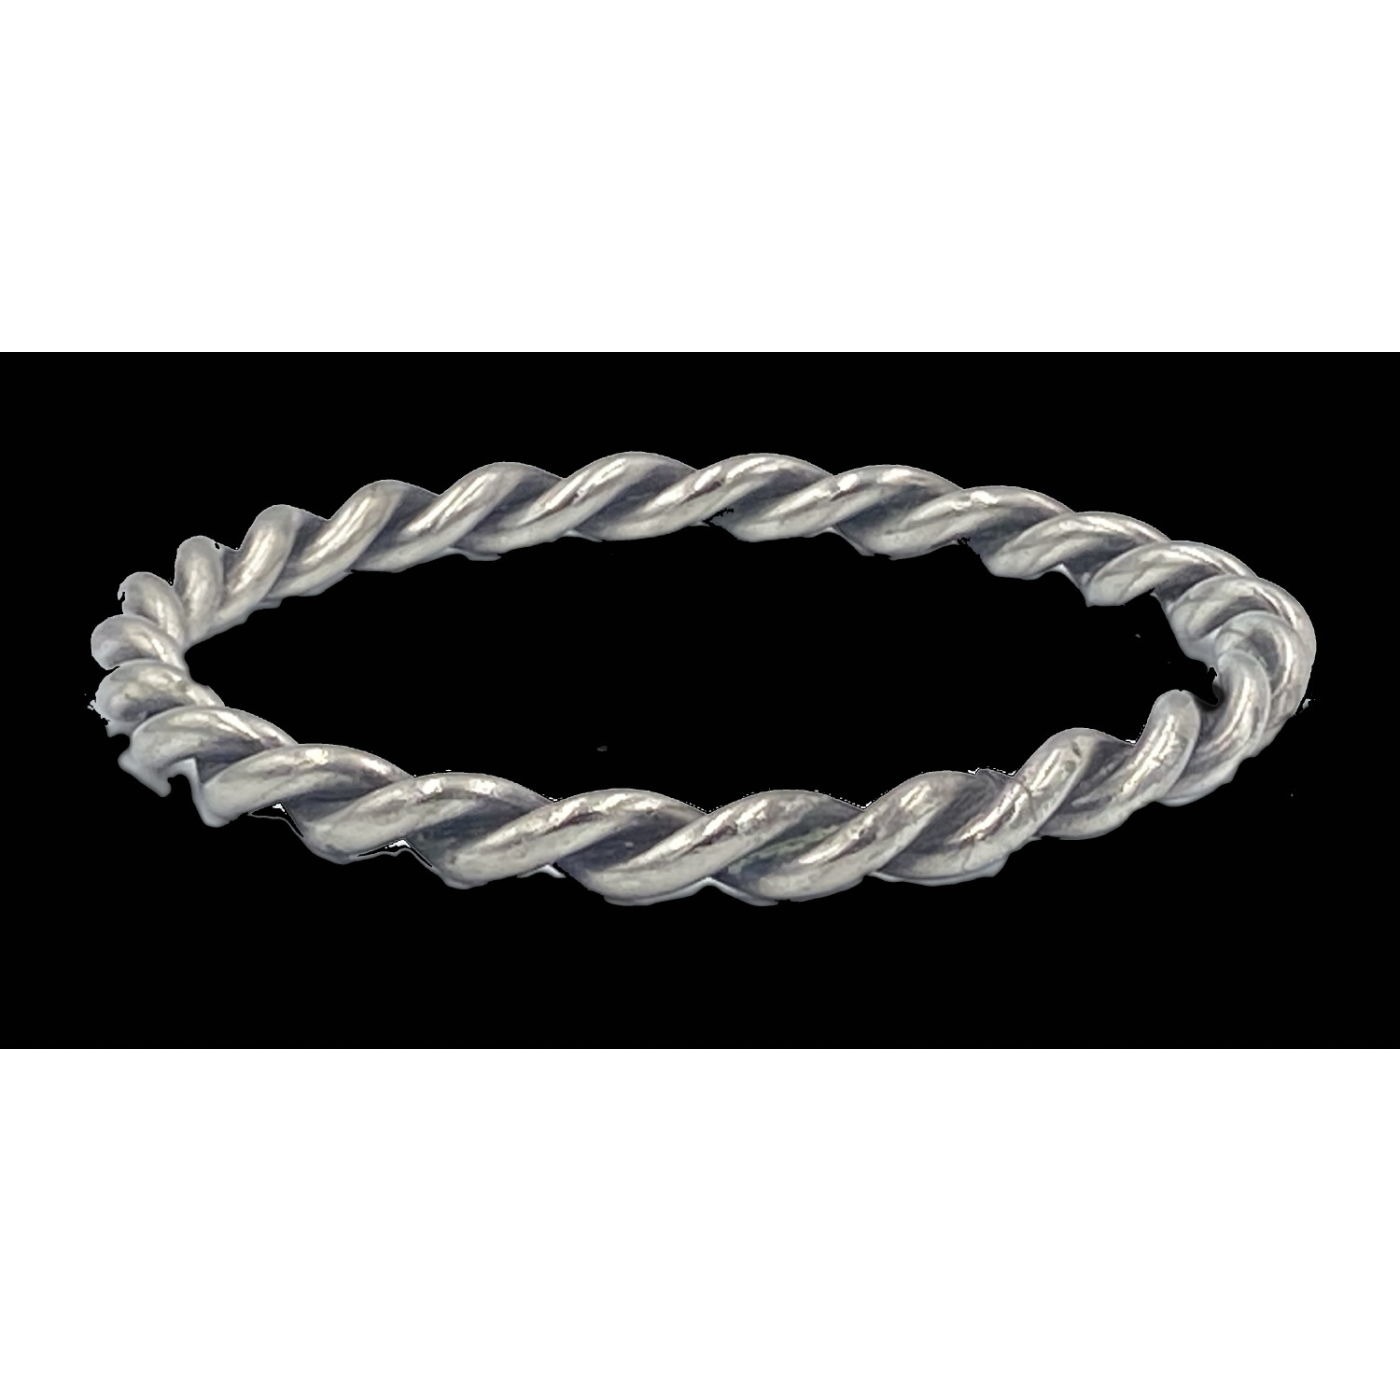 Special Simple Medium Twist Sterling Bangle - Perfect to Stack